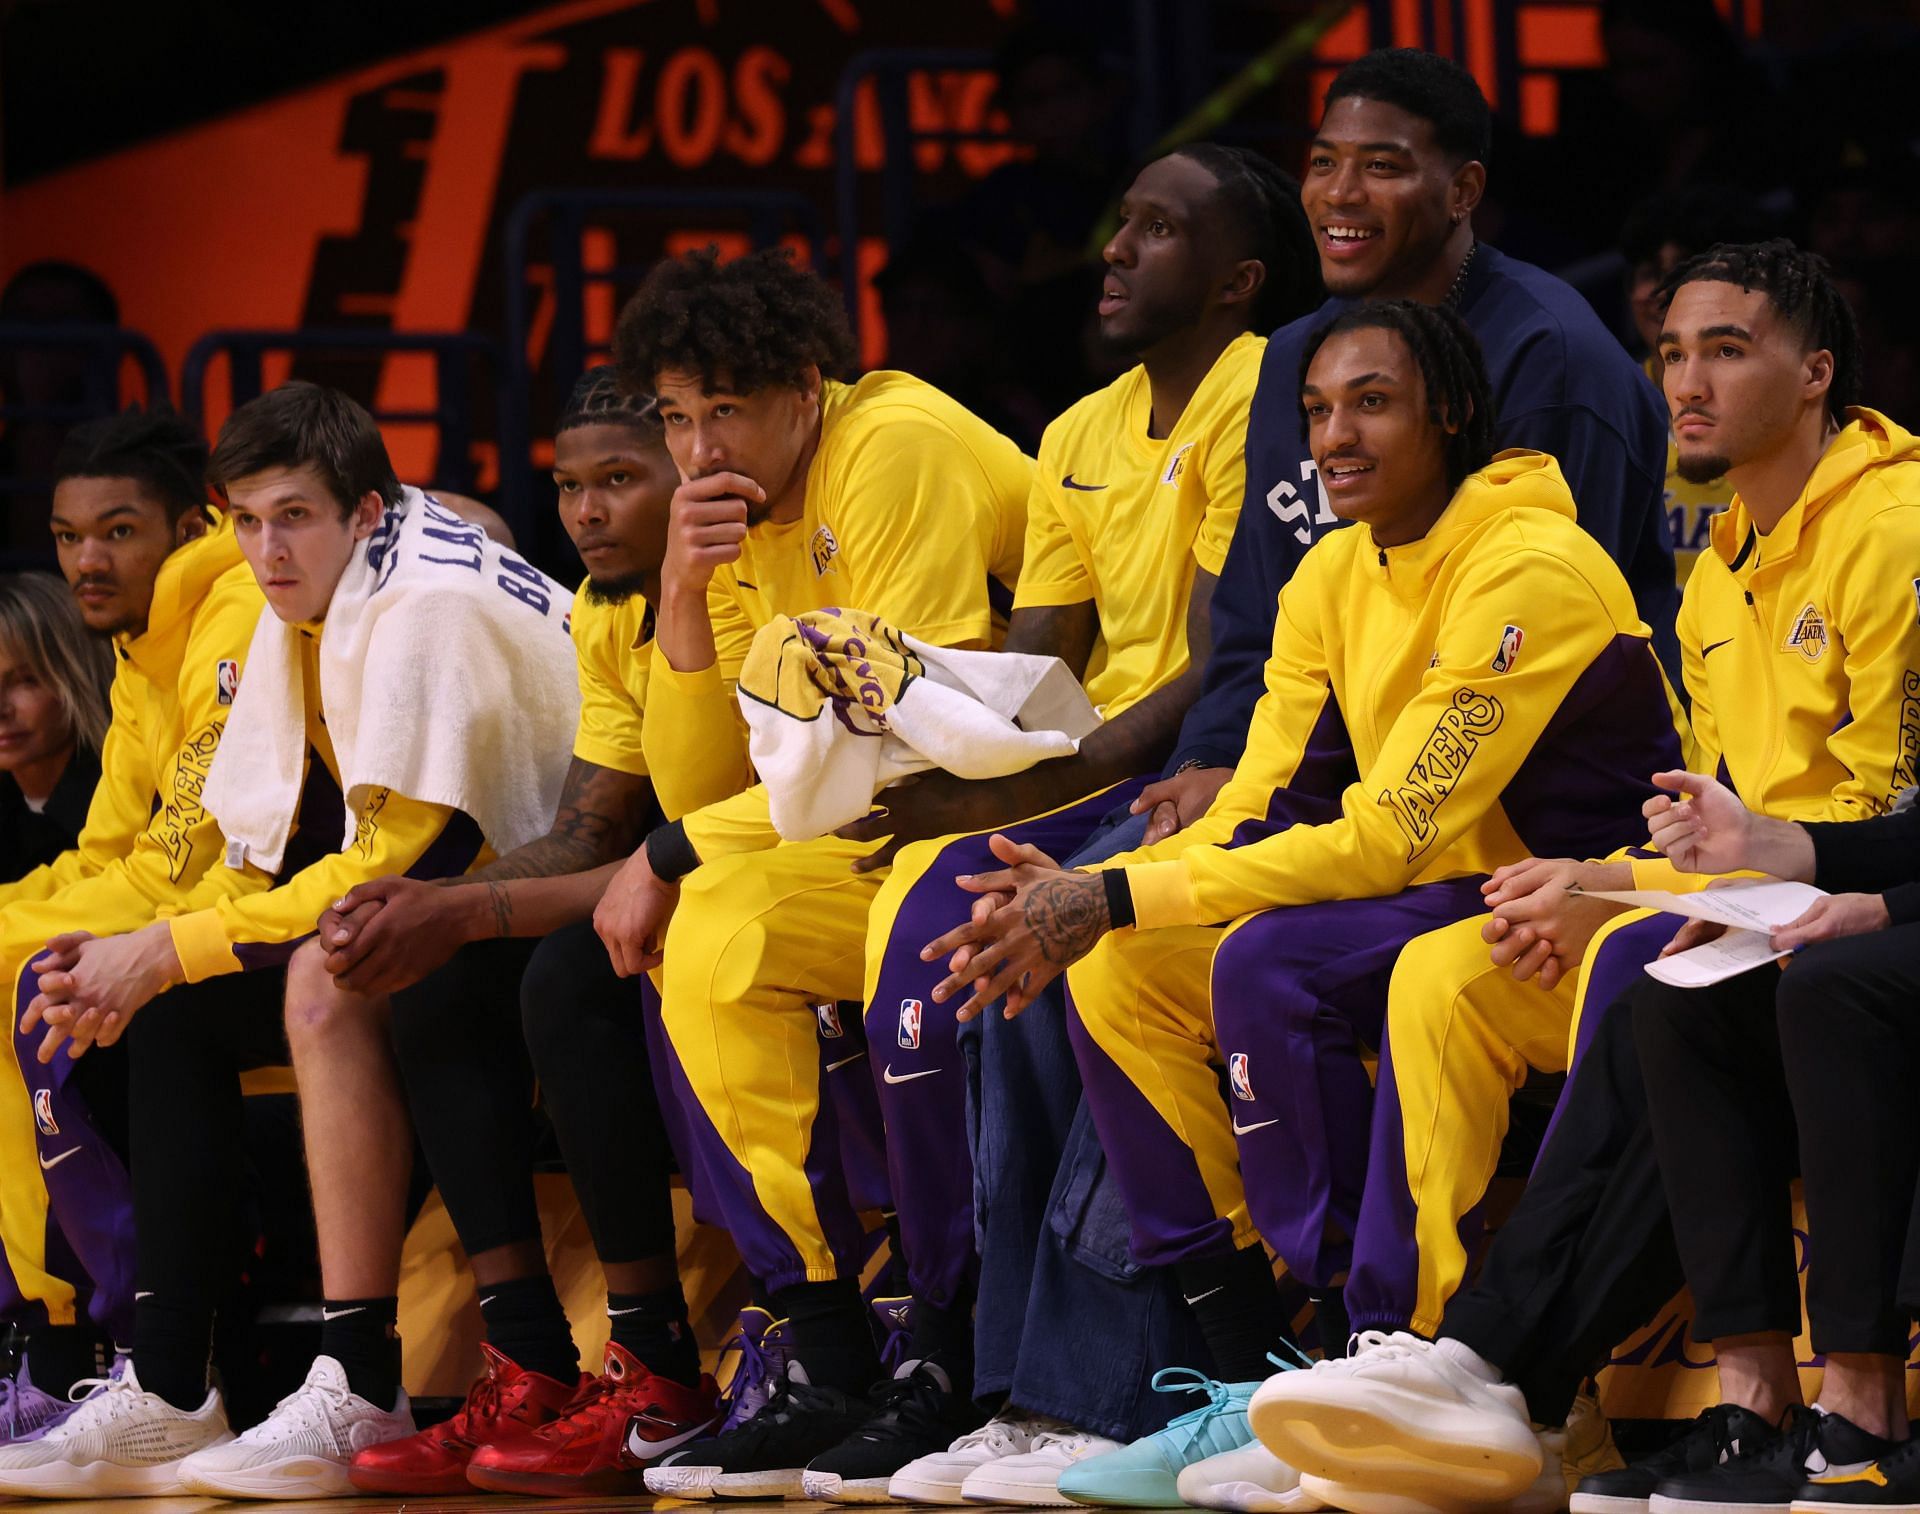 LA Lakers players watching a game from the bench